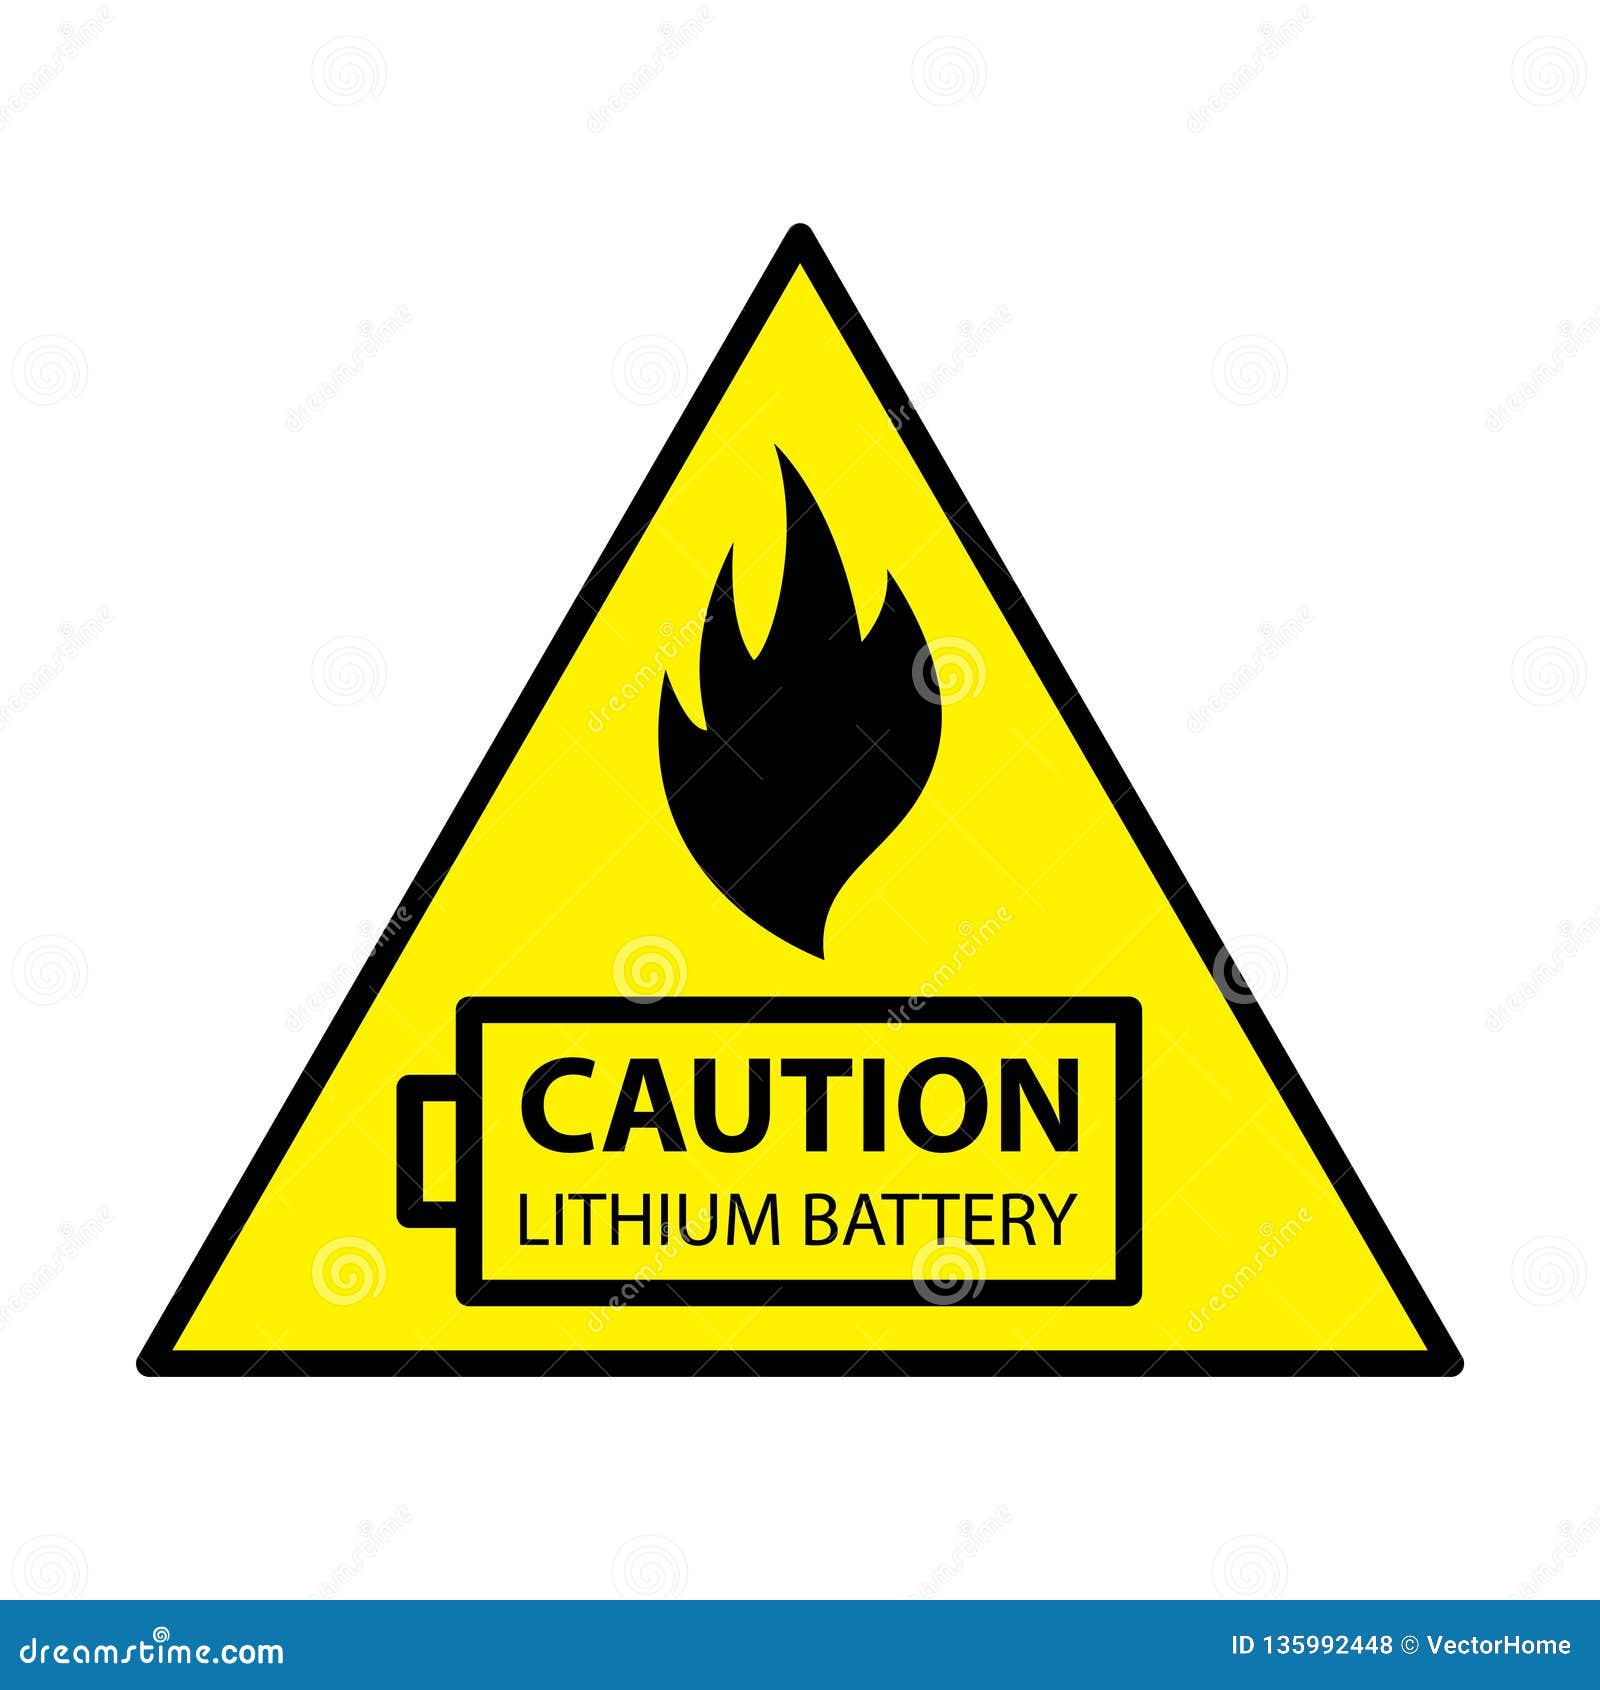 lithium ion battery caution,  